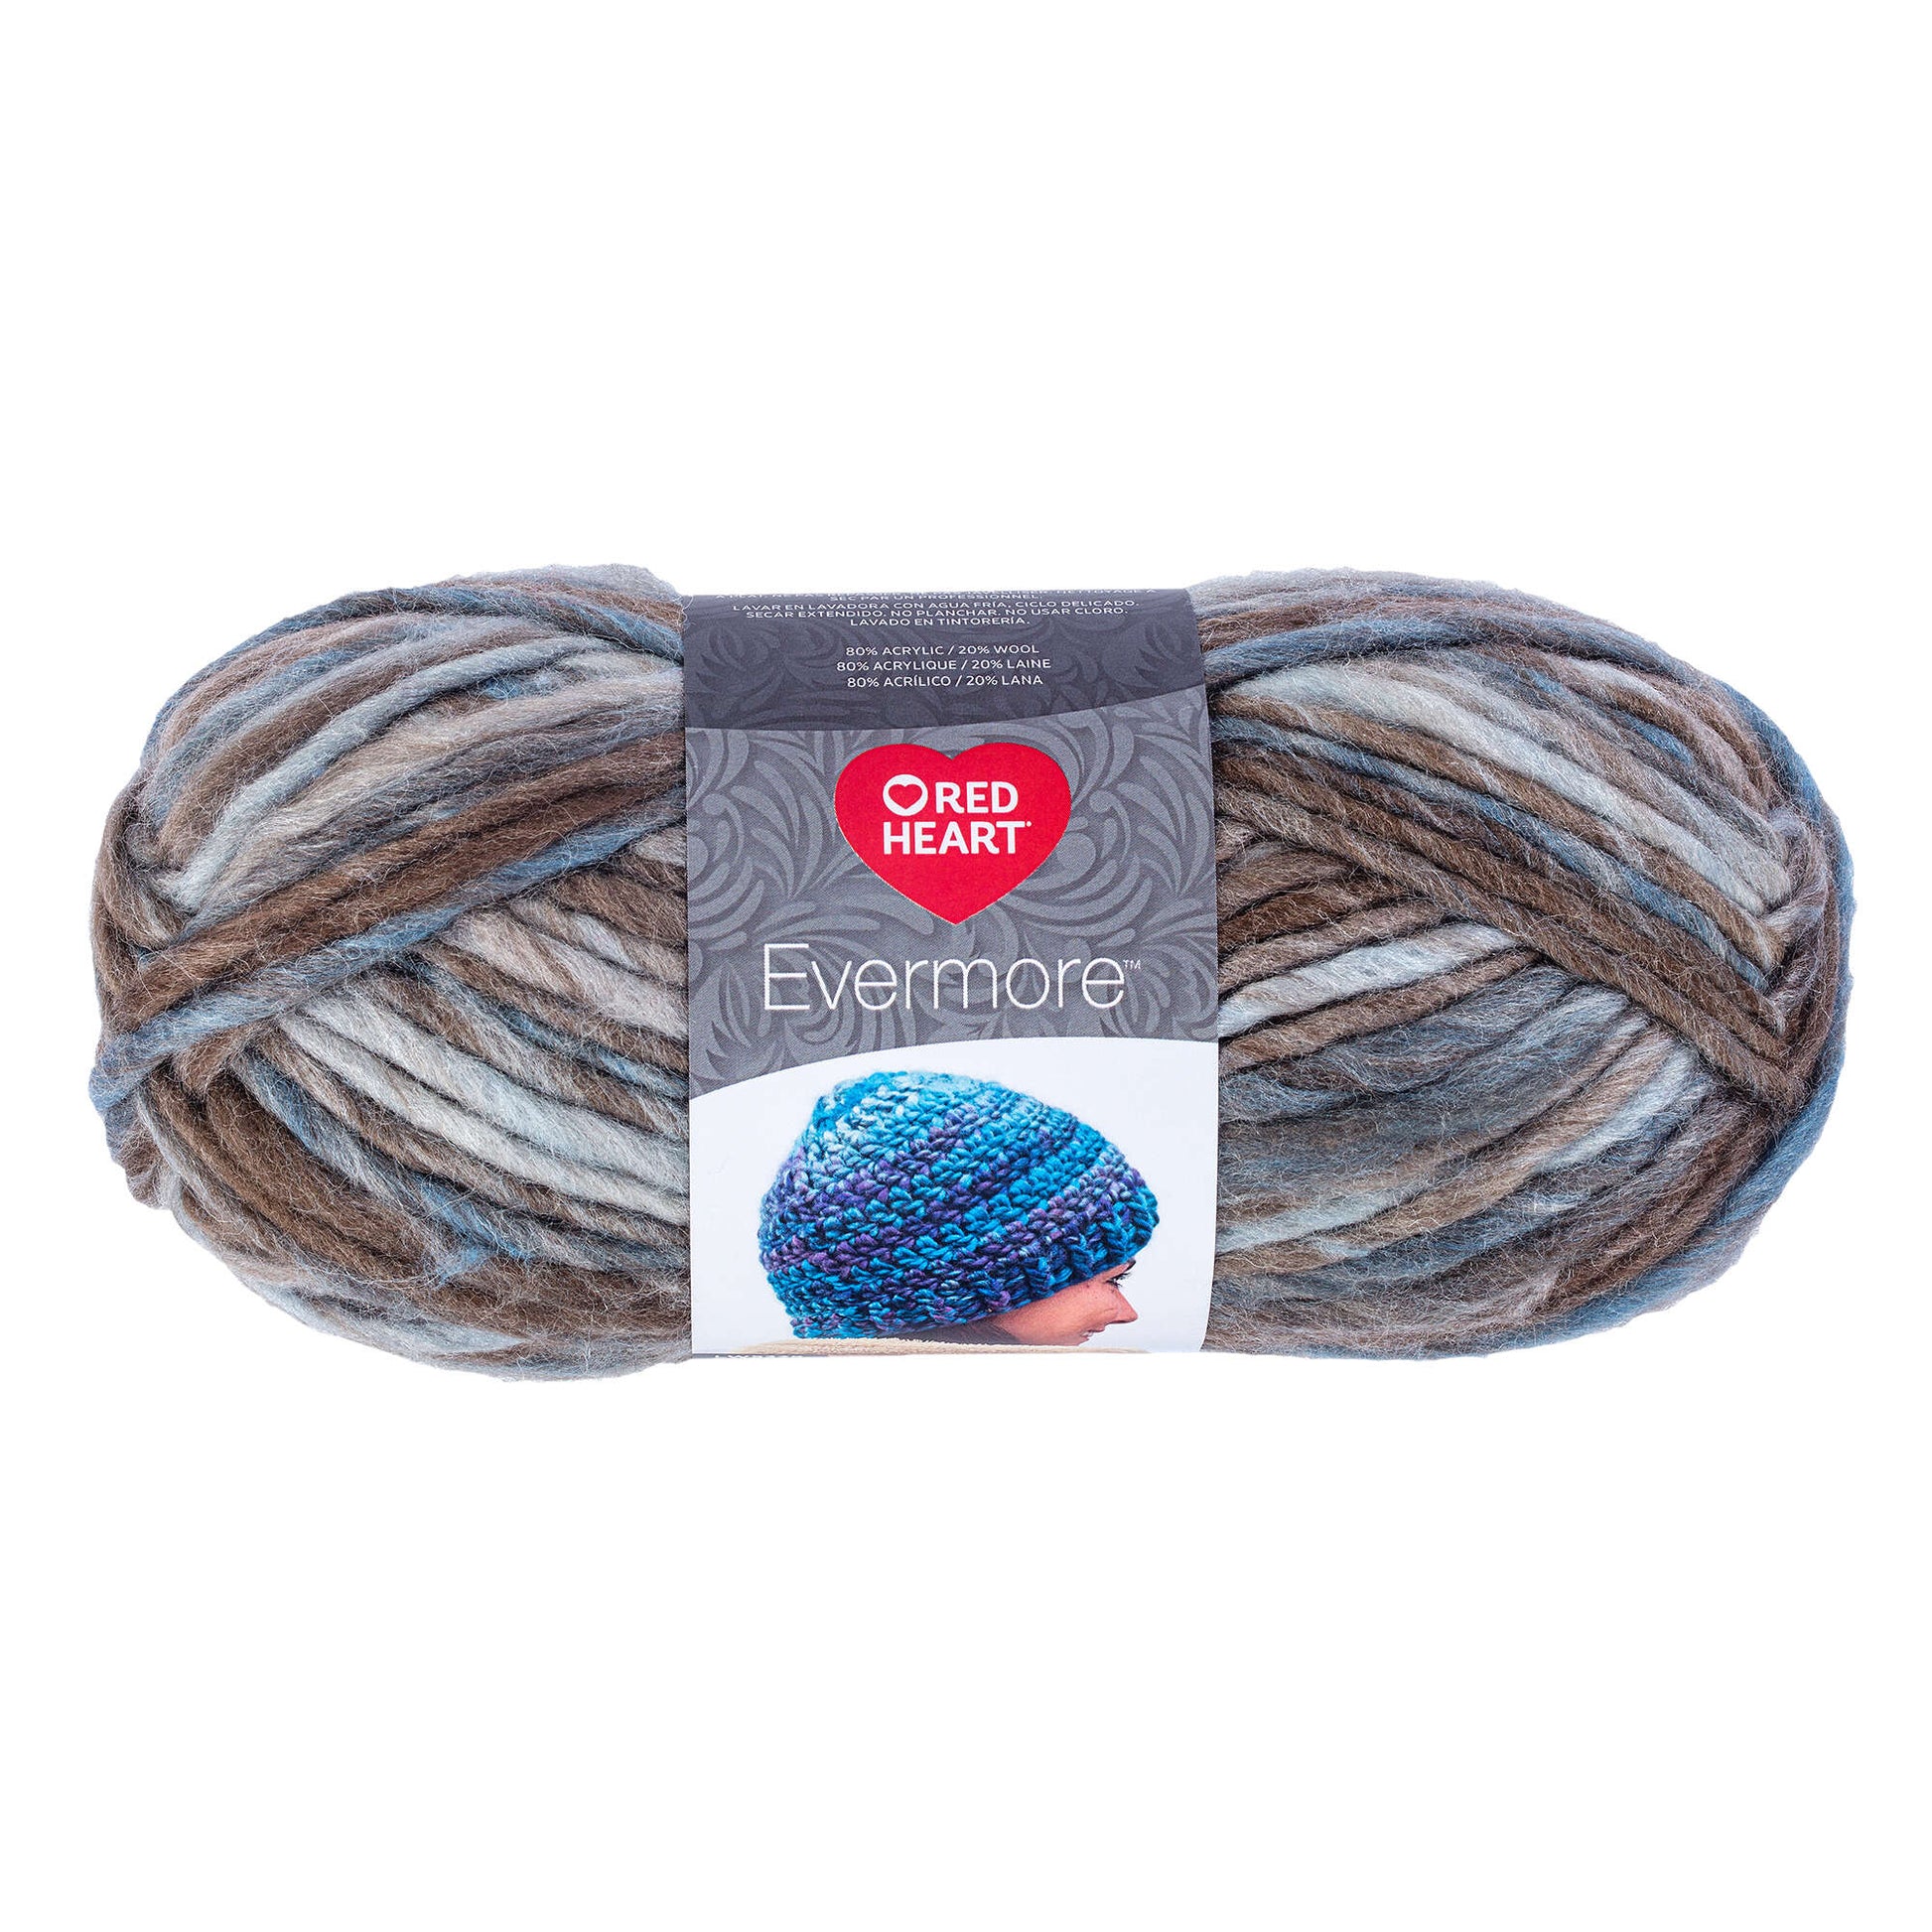 Red Heart Evermore Yarn - Discontinued shades